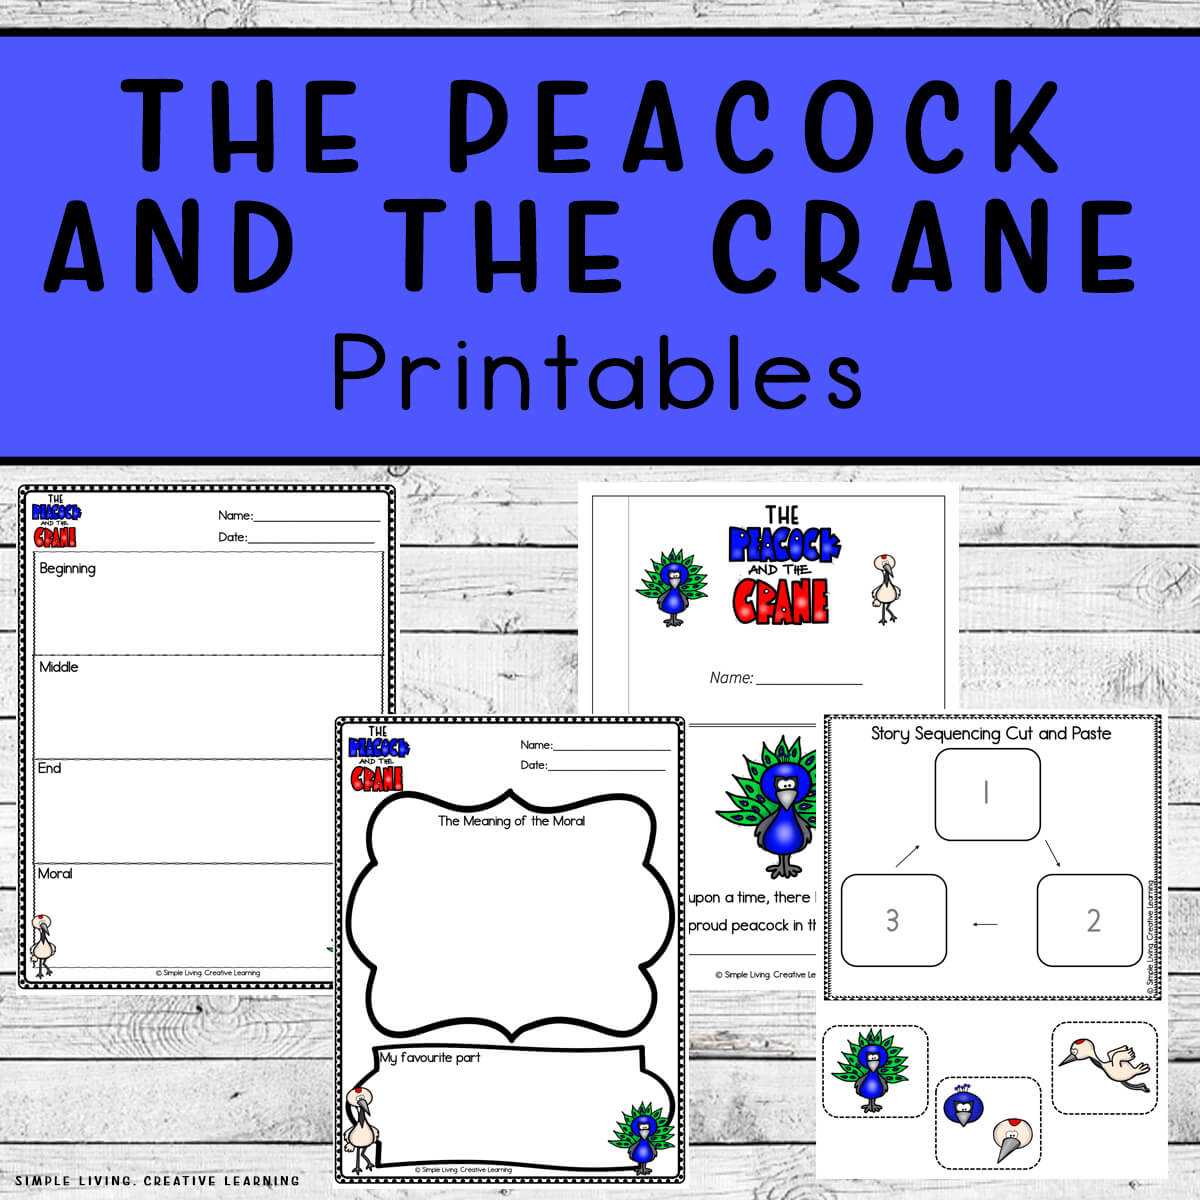 The Peacock and the Crane Printables - four pages